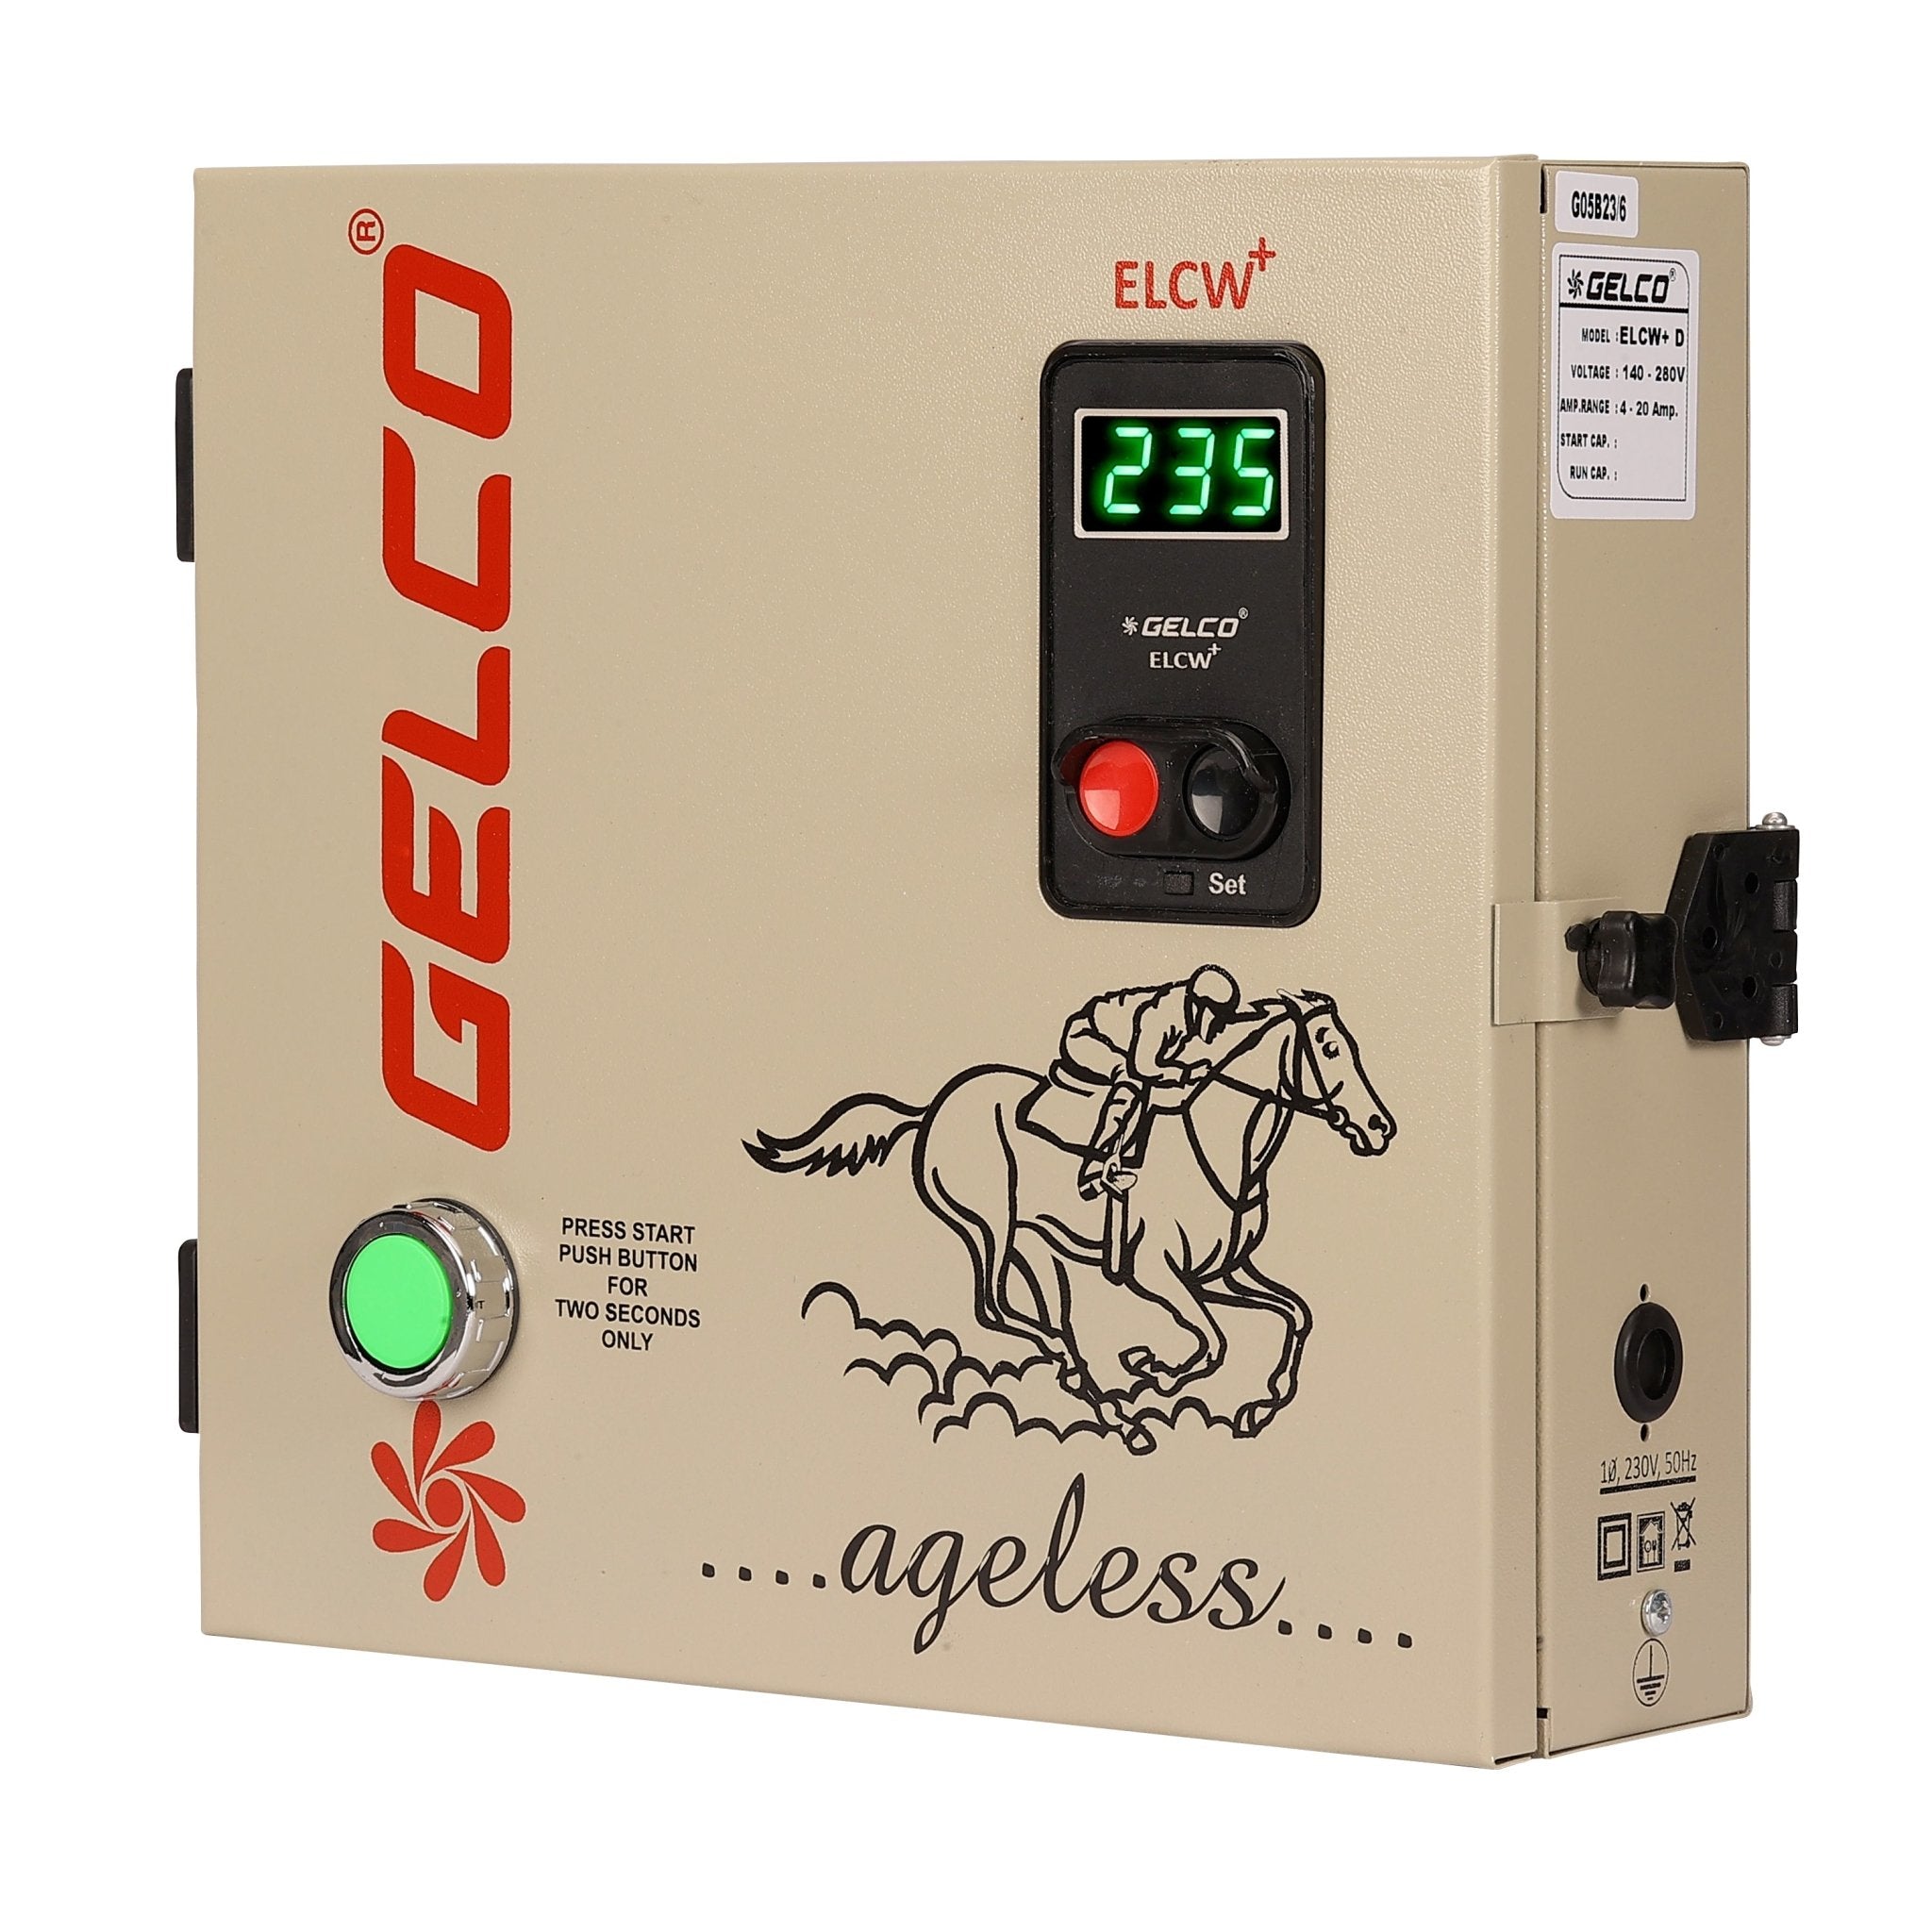 Gelco ELCW+, Operates And Protects All Submersible And Mono-block Motors And Pumps, 230V, 50Hz - Gelco Electronics Pvt. Ltd.